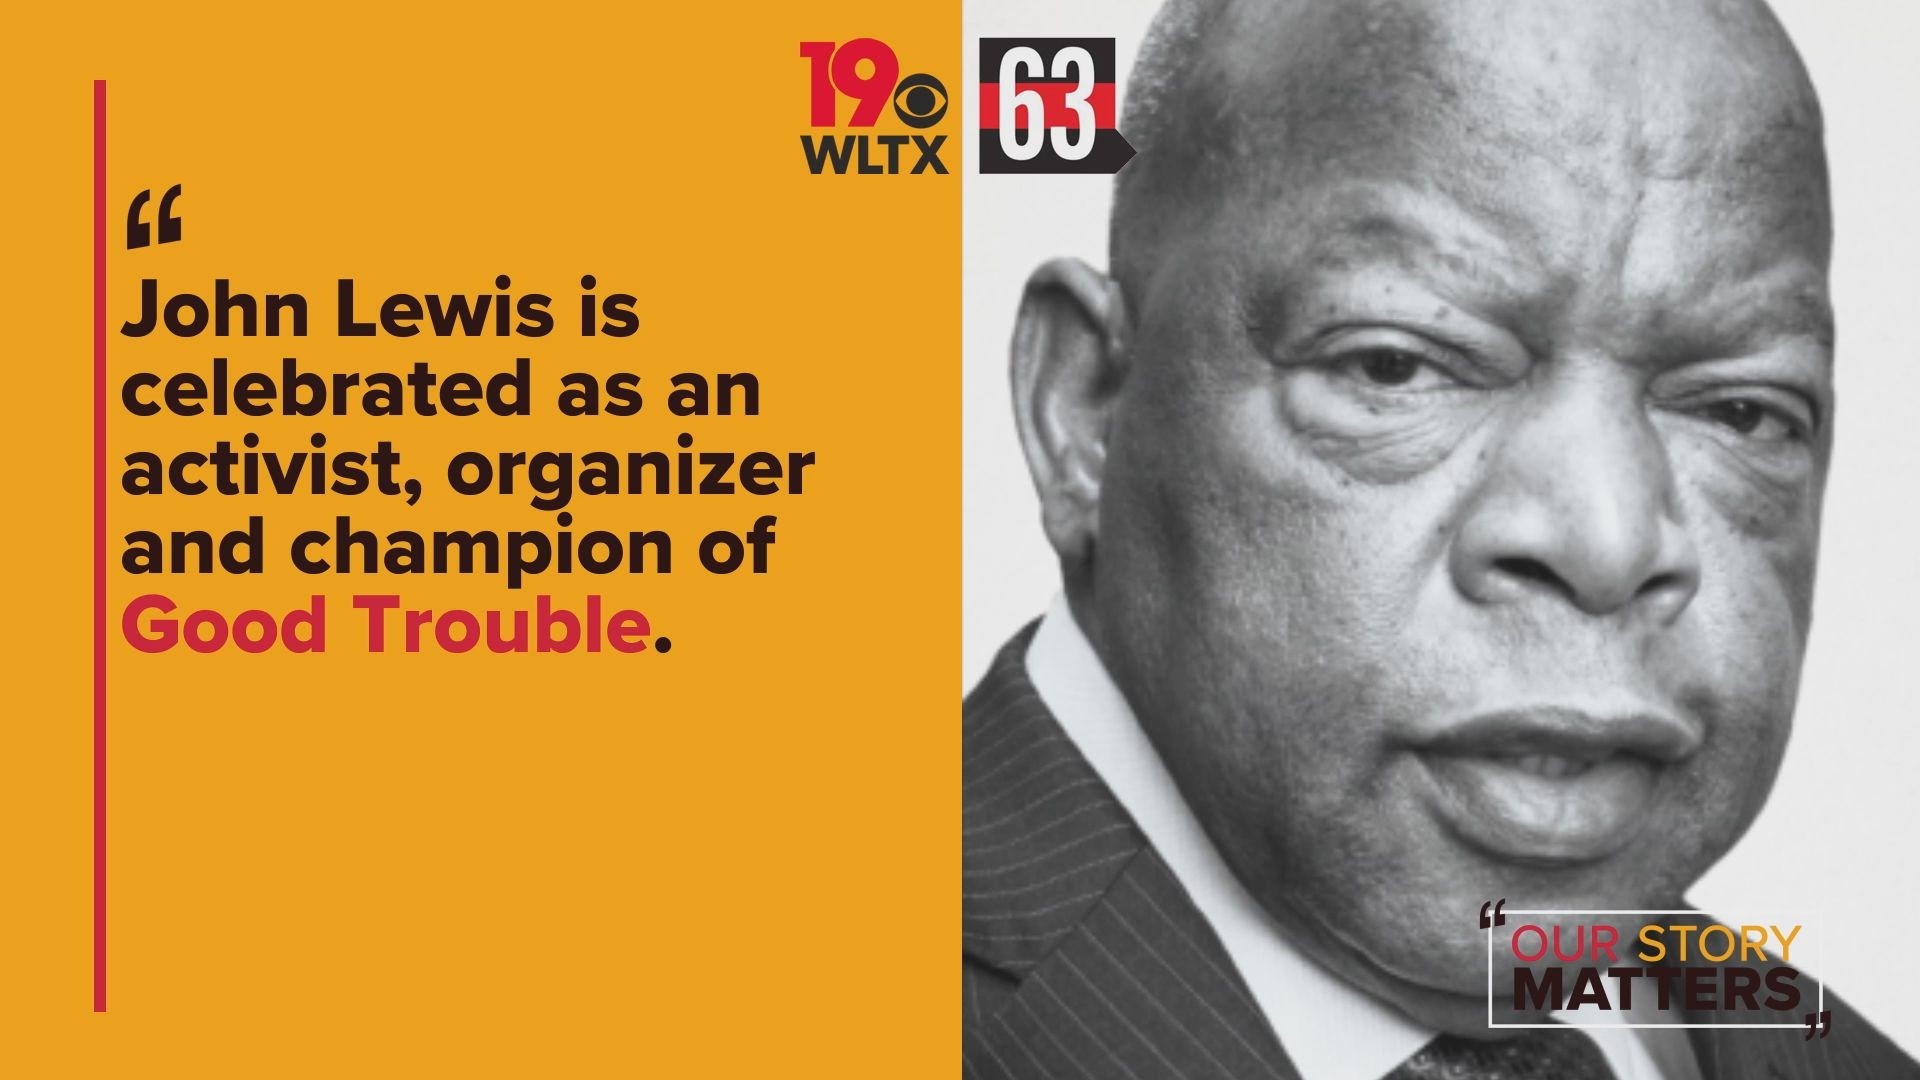 John Lewis is celebrated as an activist, organizer, and champion of Good Trouble.